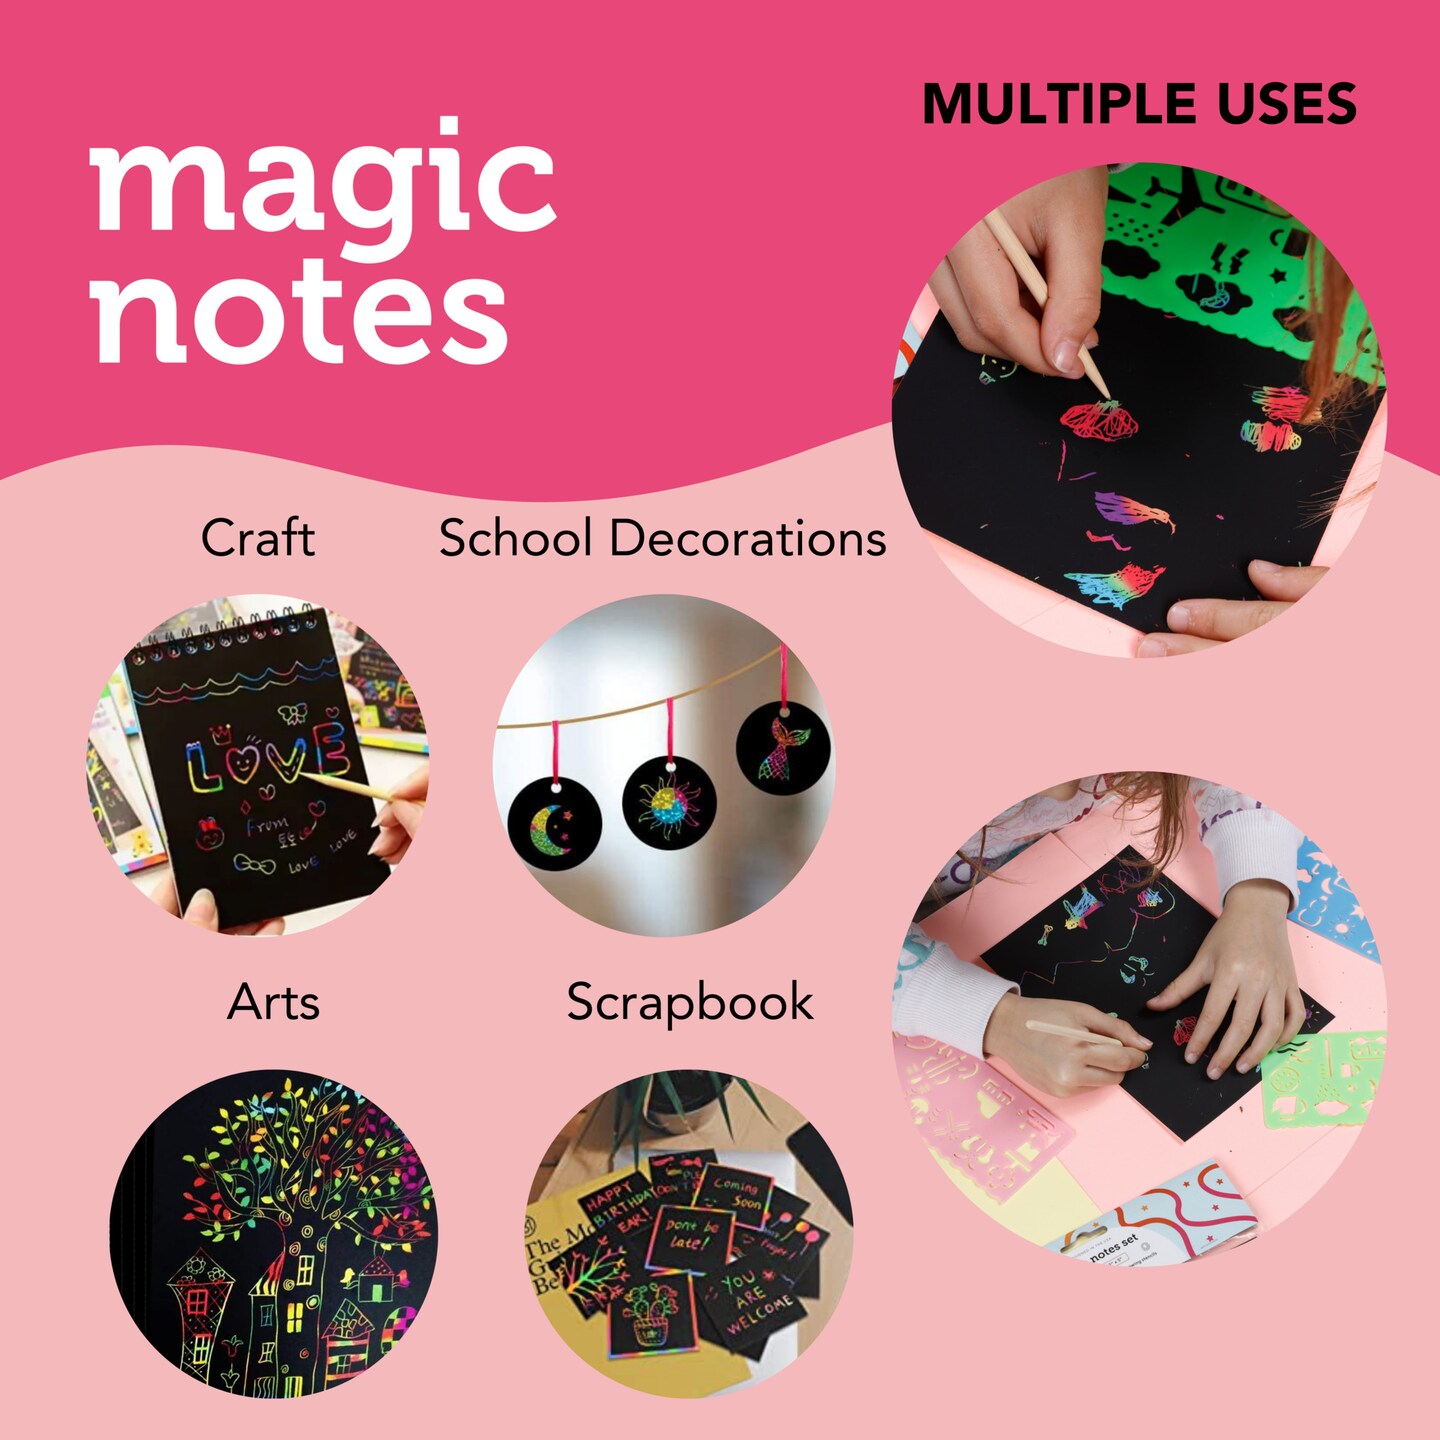 Incraftables Rainbow Scratch Paper Set. Magic Notes Kit with 30pcs